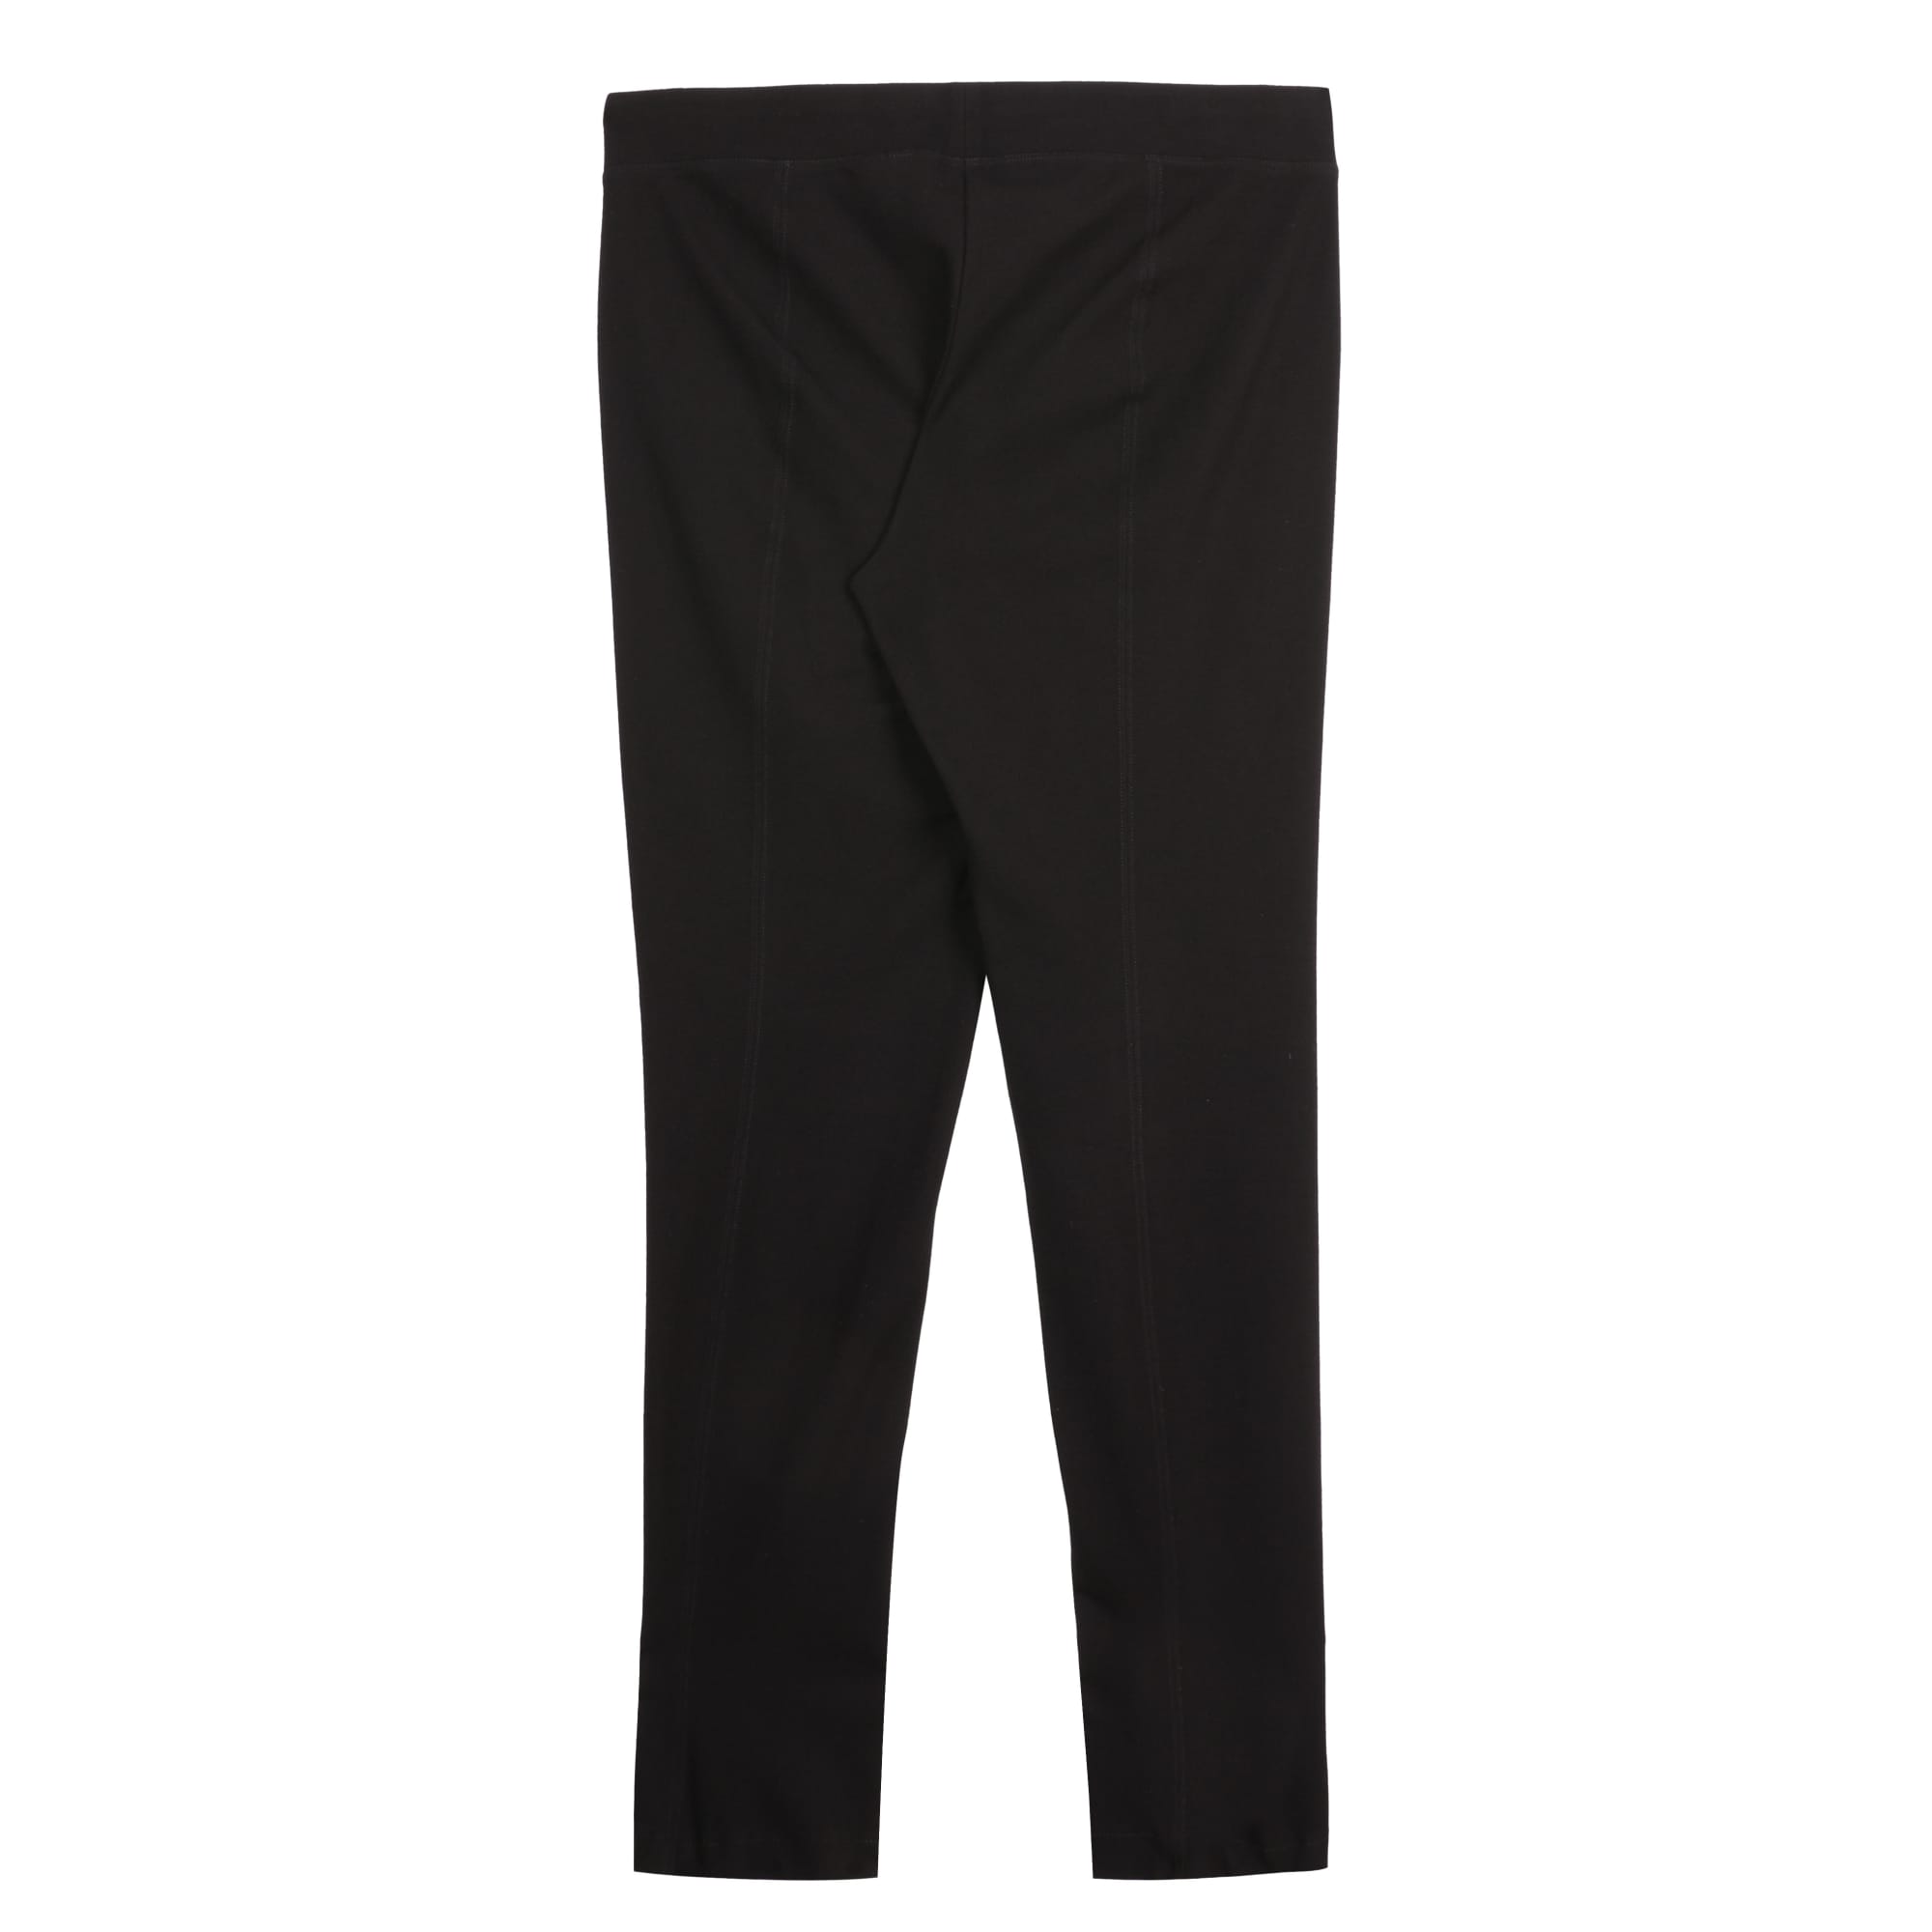 Used Stretch Viscose Twill Knit Pant Black | EILEEN FISHER RENEW